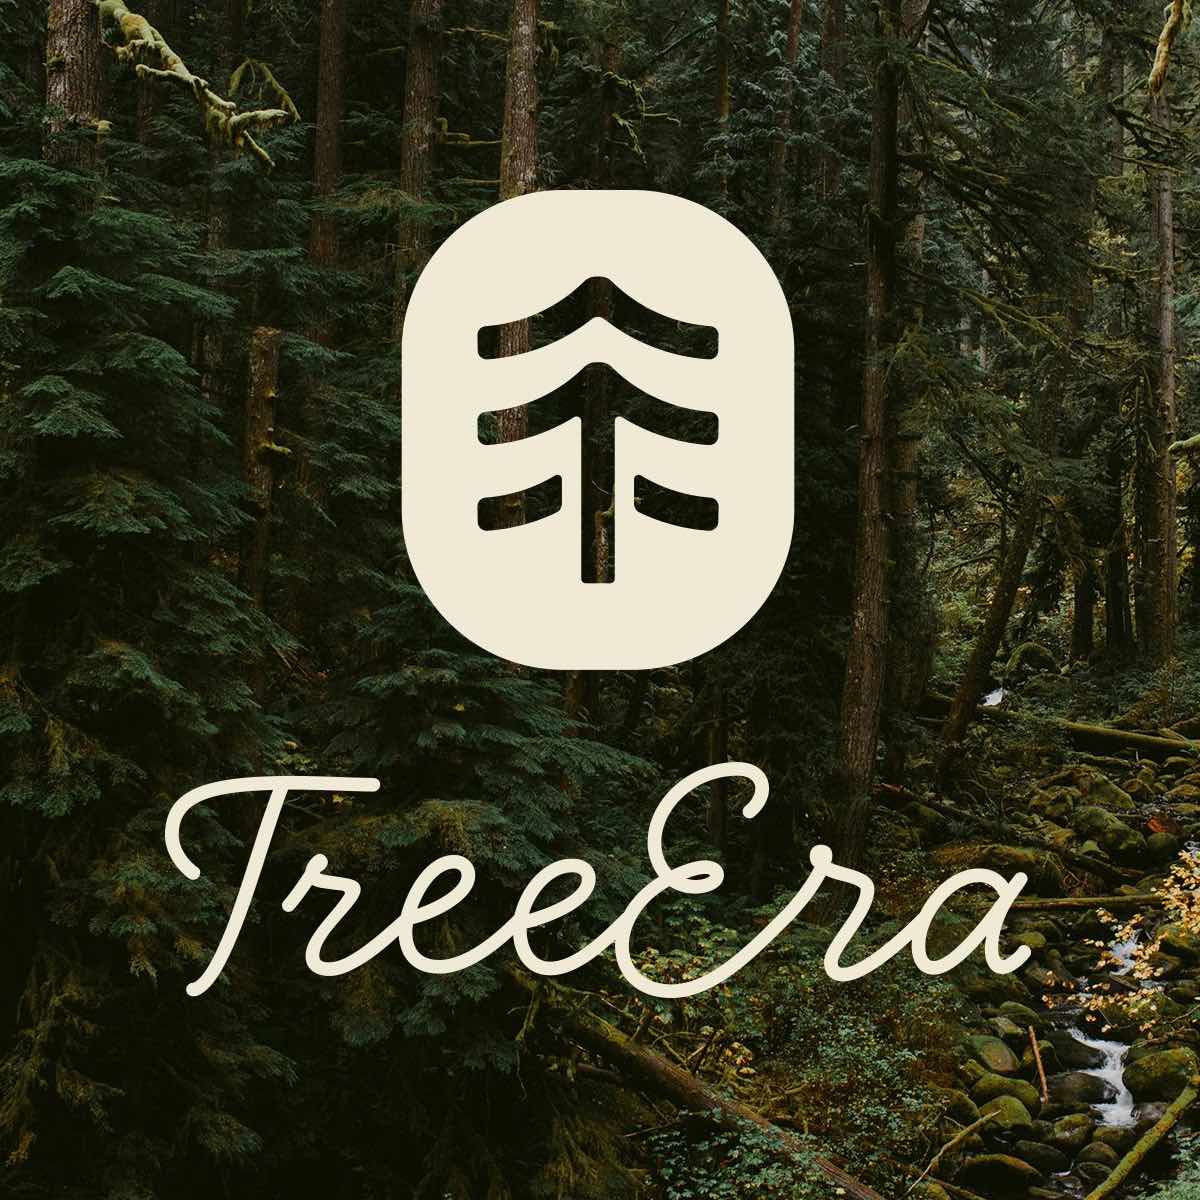 TreeEra full logo on a forest background